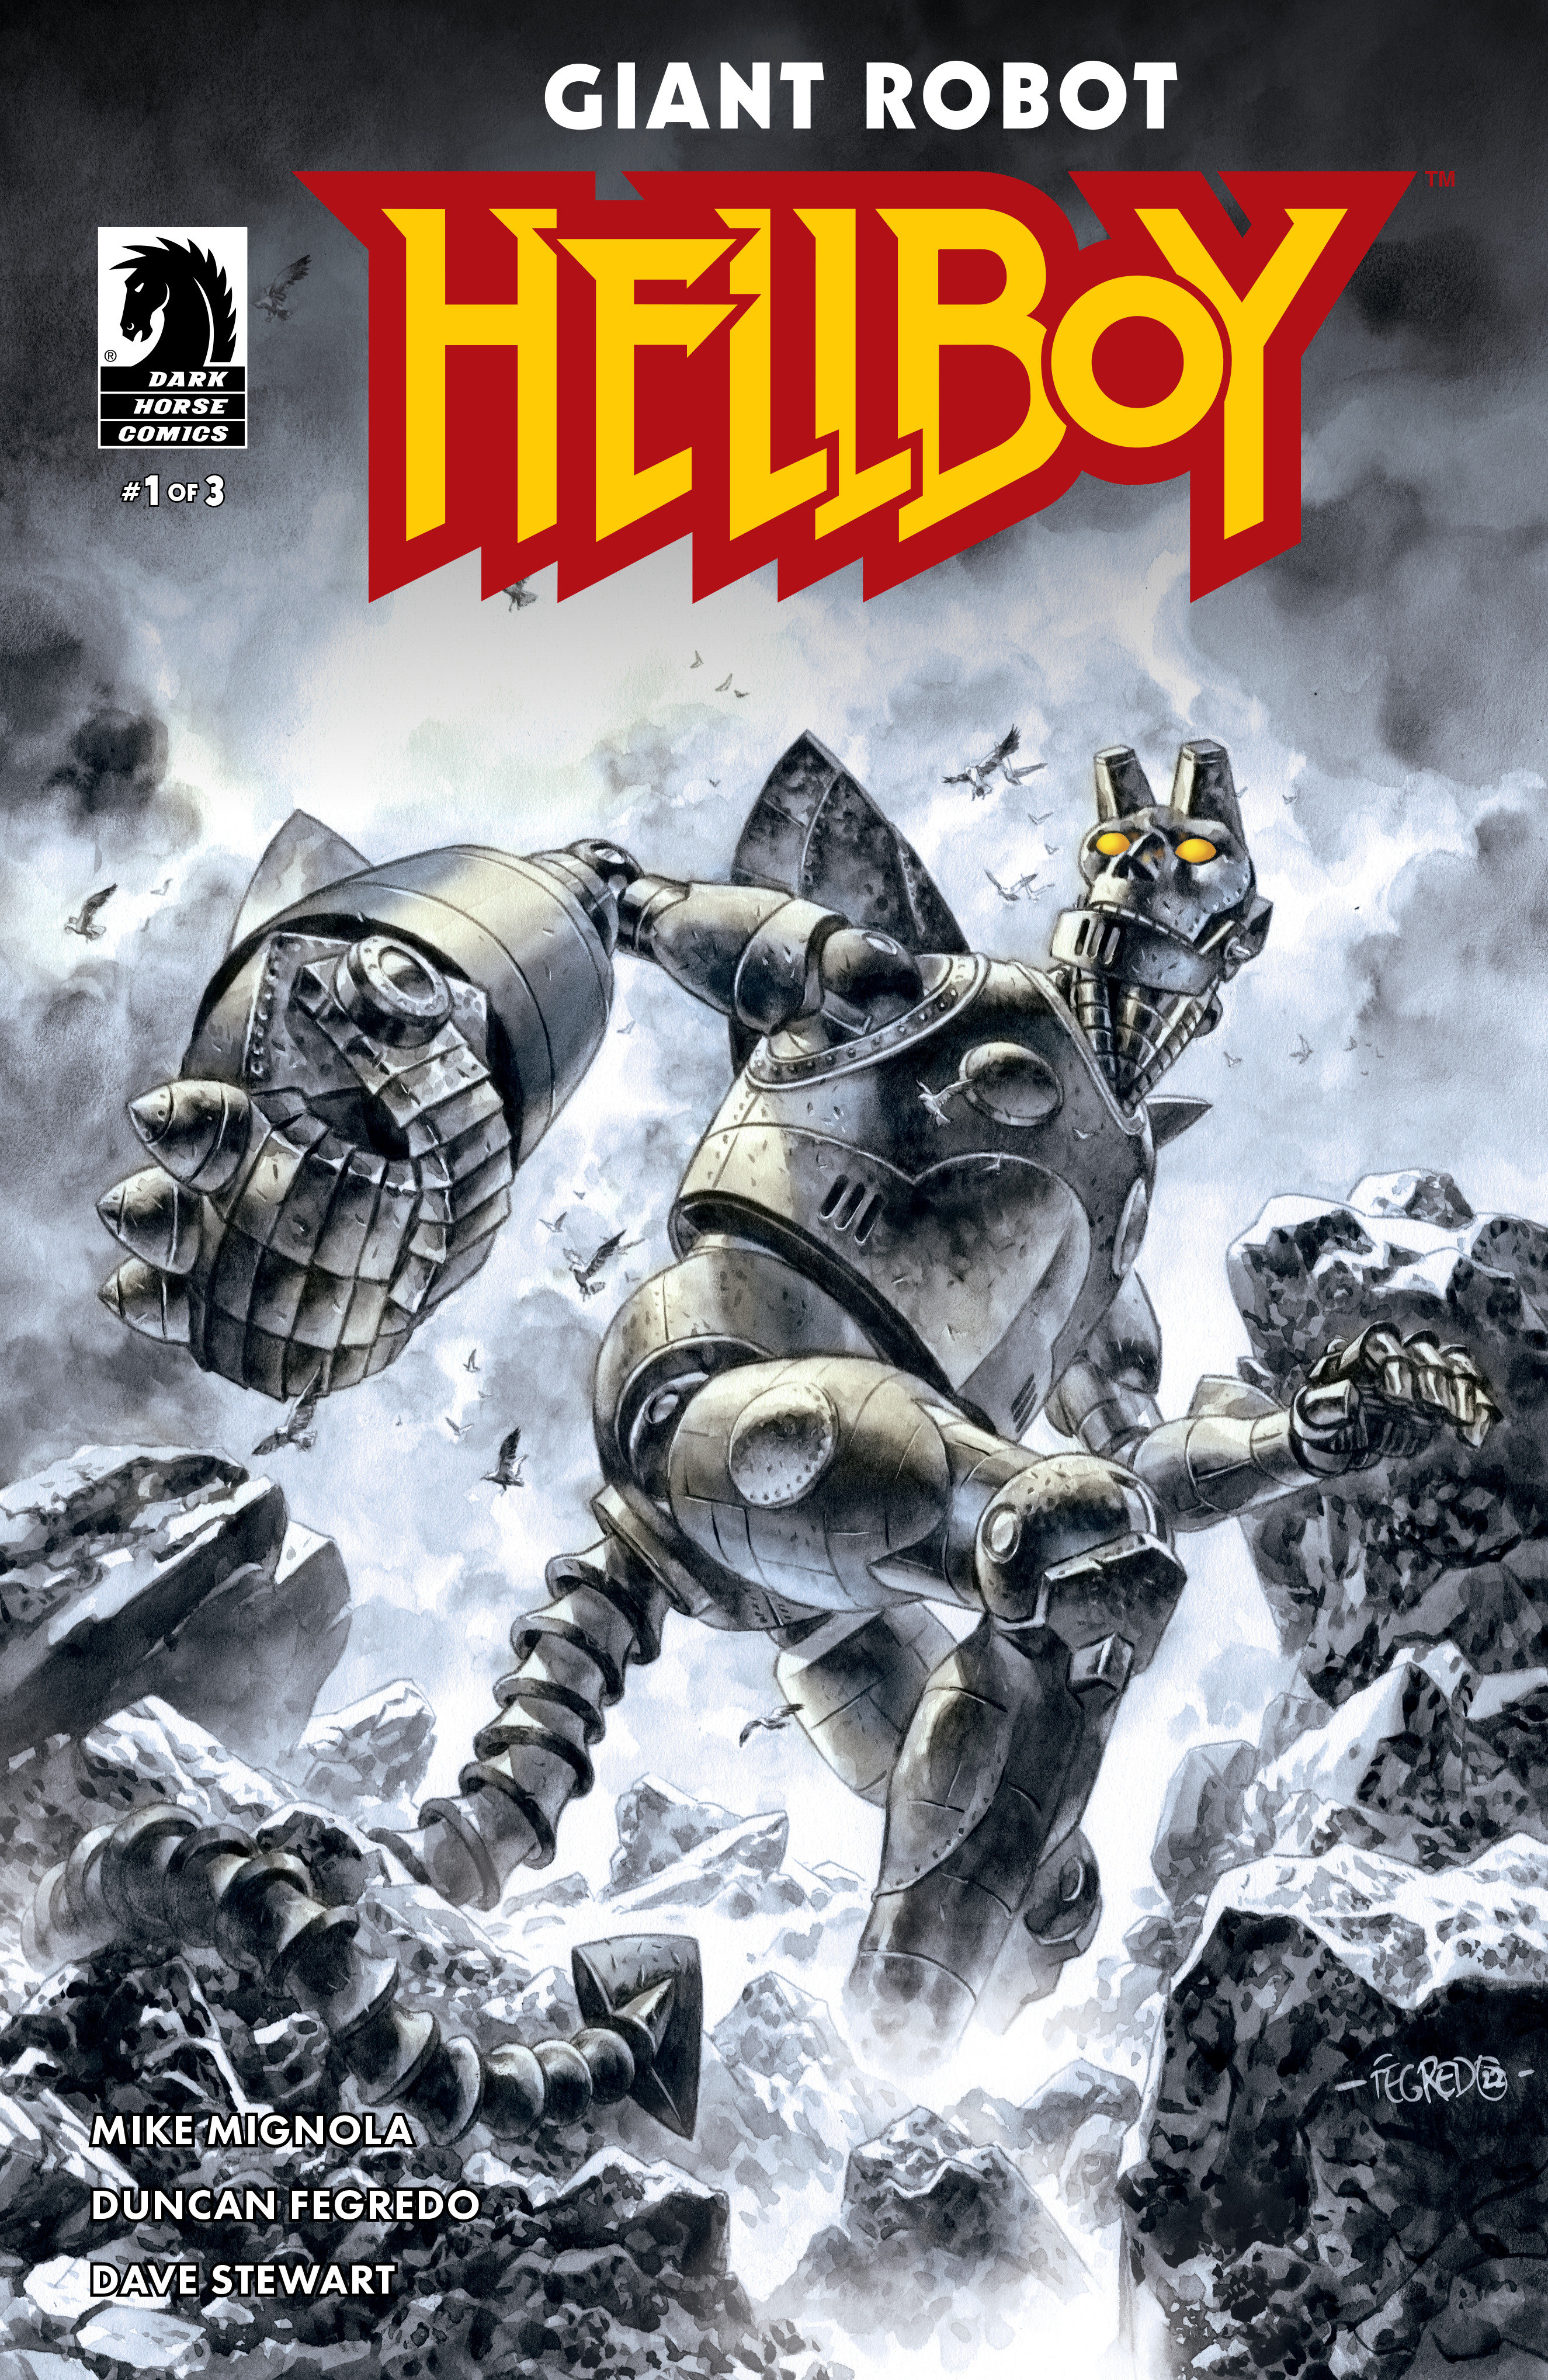 Hellboy & the B.P.R.D. Ongoing #68 Giant Robot Hellboy #1 Cover A (Duncan Fegredo)